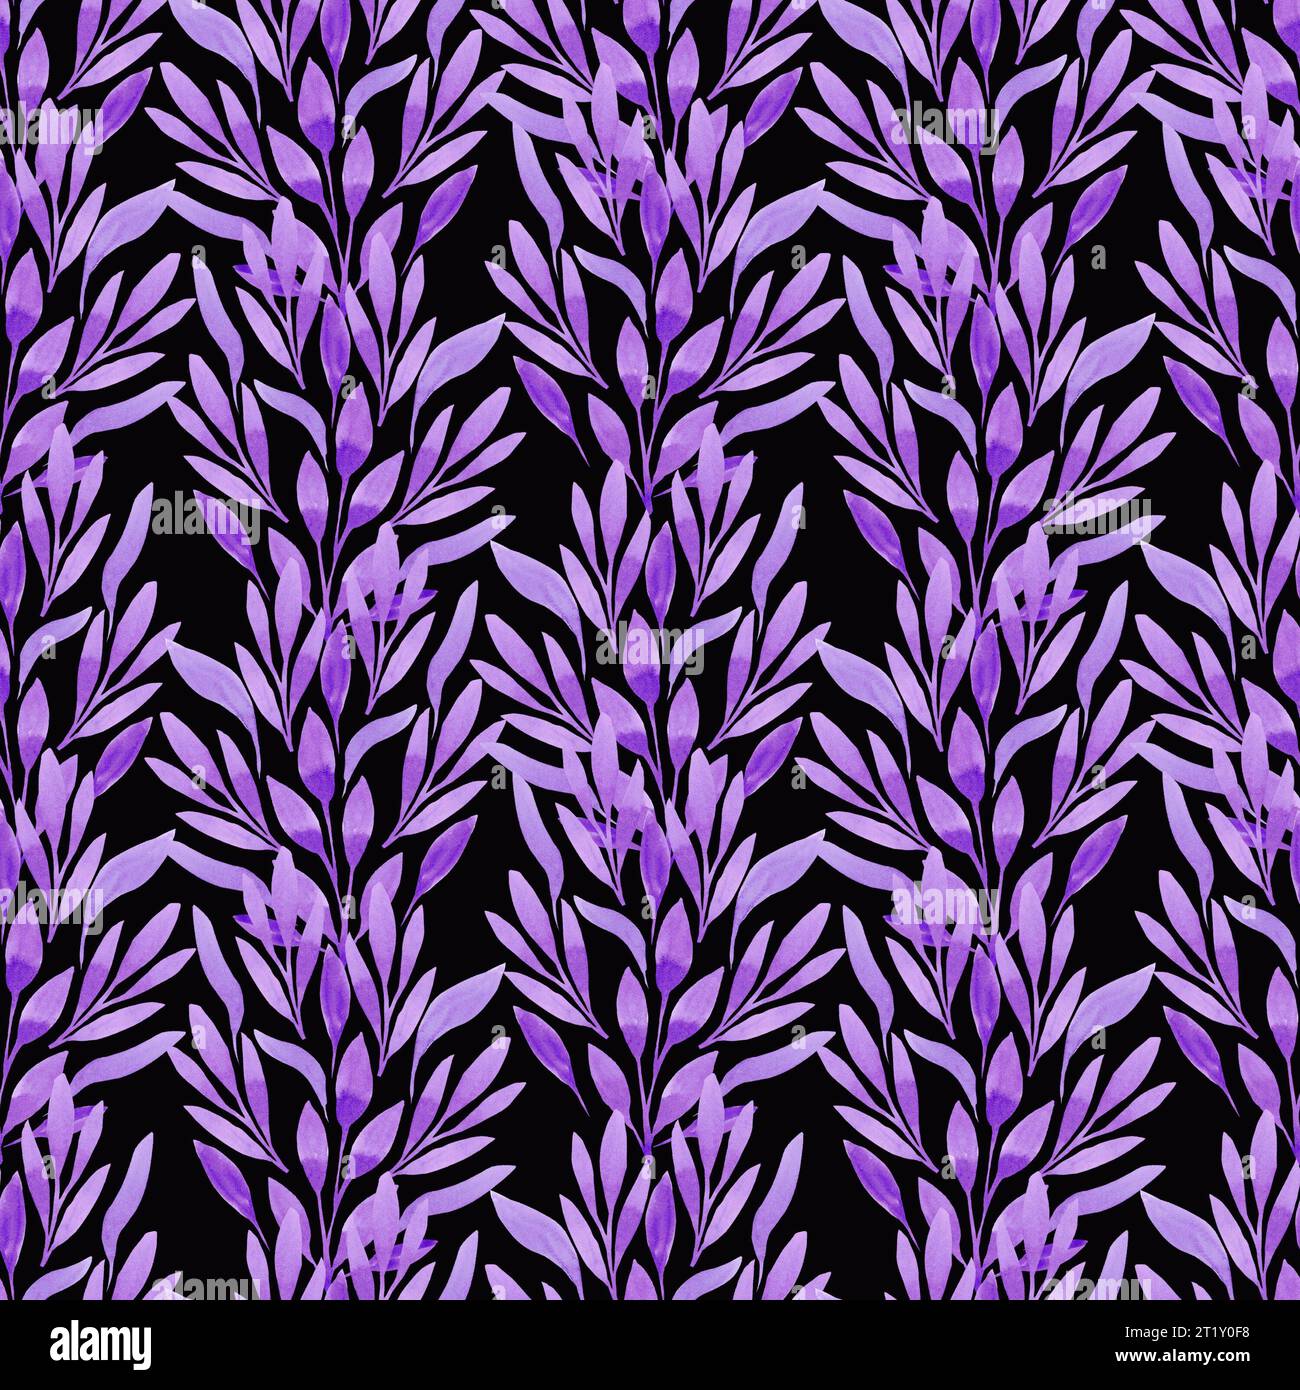 Hand drawn watercolor purple leaves seamless pattern isolated on black background. Can be used for textile, fabric and other printed products Stock Photo